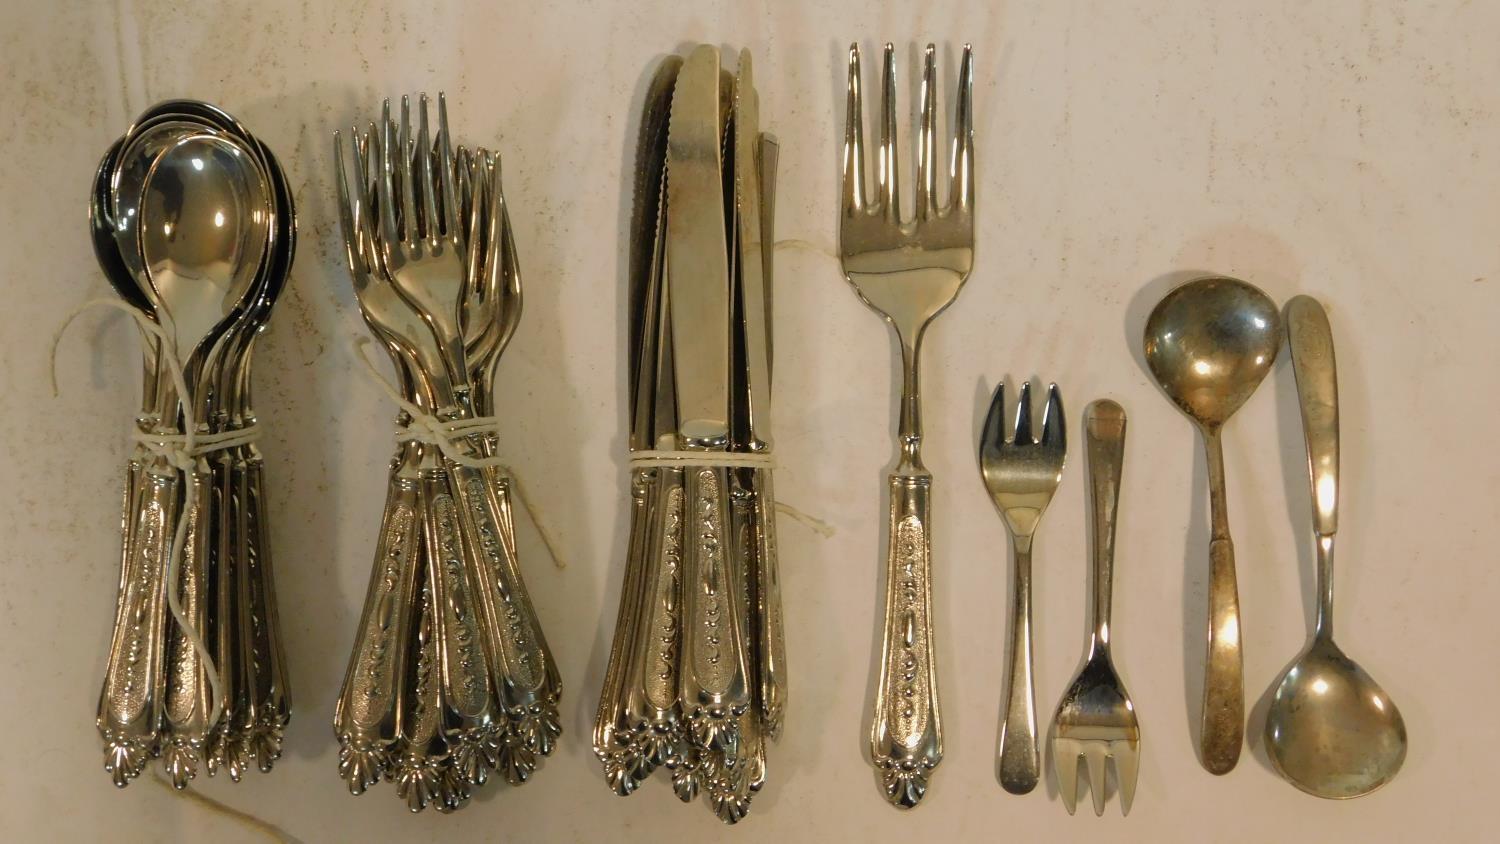 A Epzing repousse design silver plated Italian cutlery set and other silver plated cutlery.